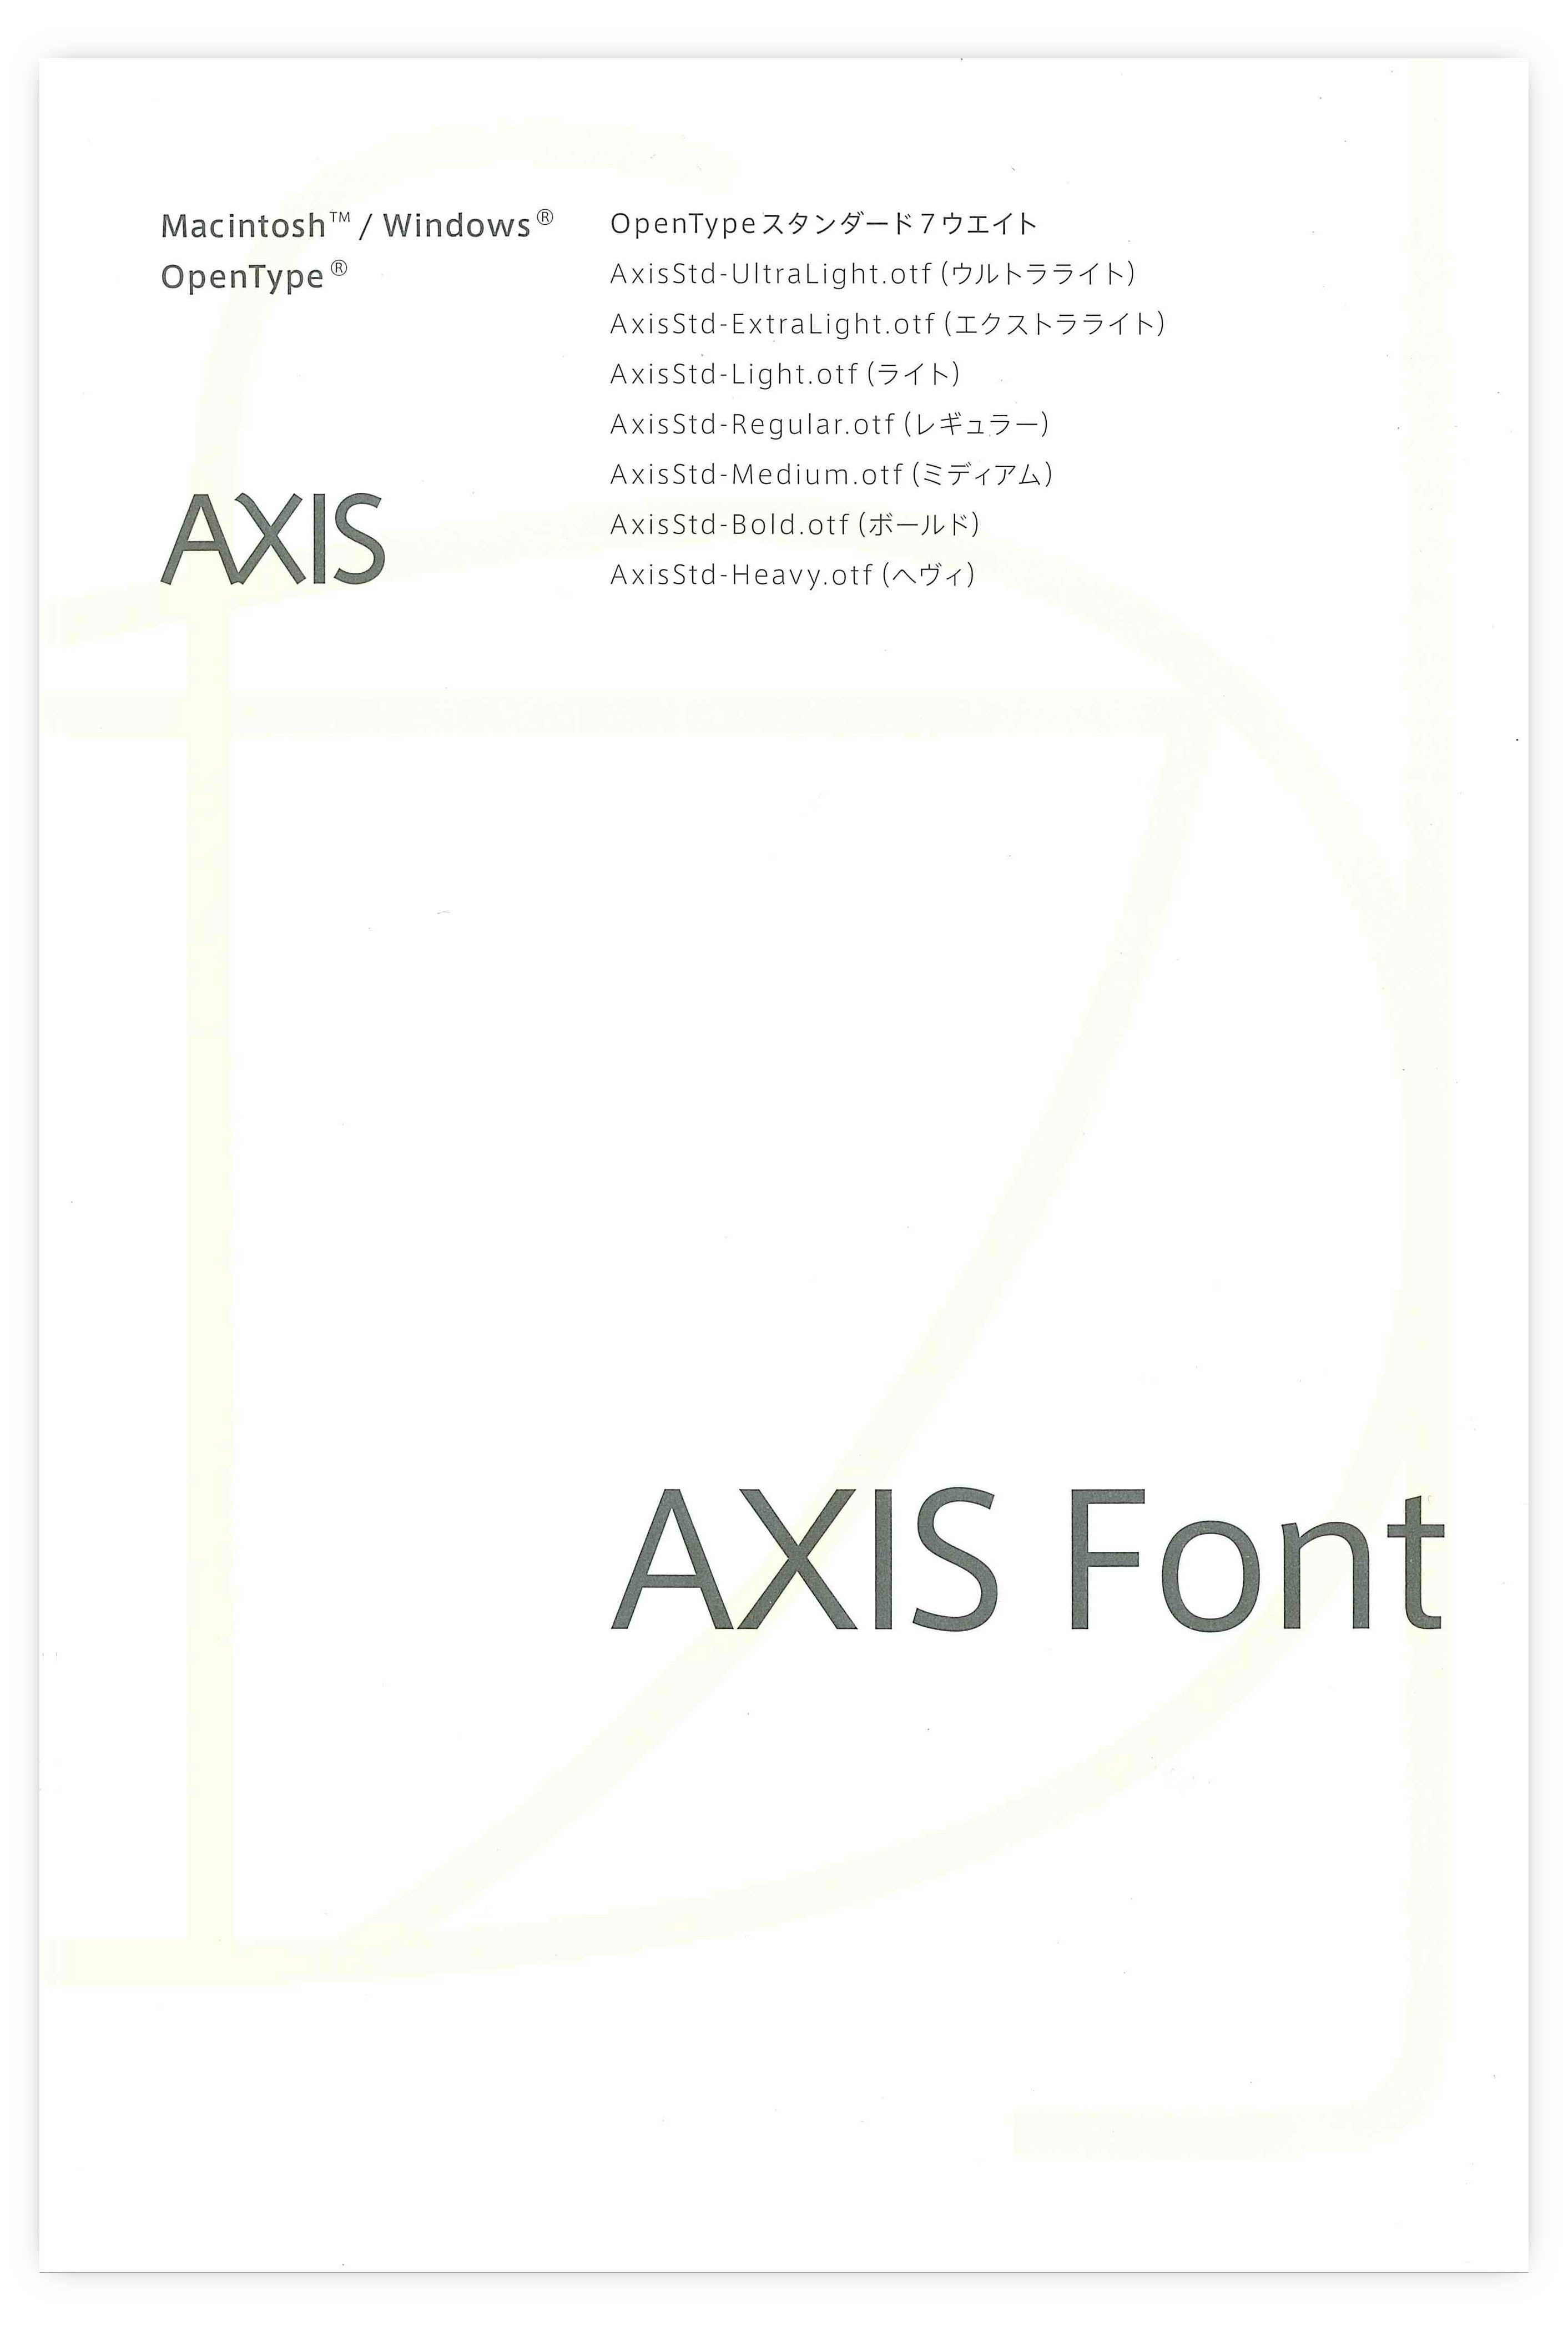 AXIS Font 発表